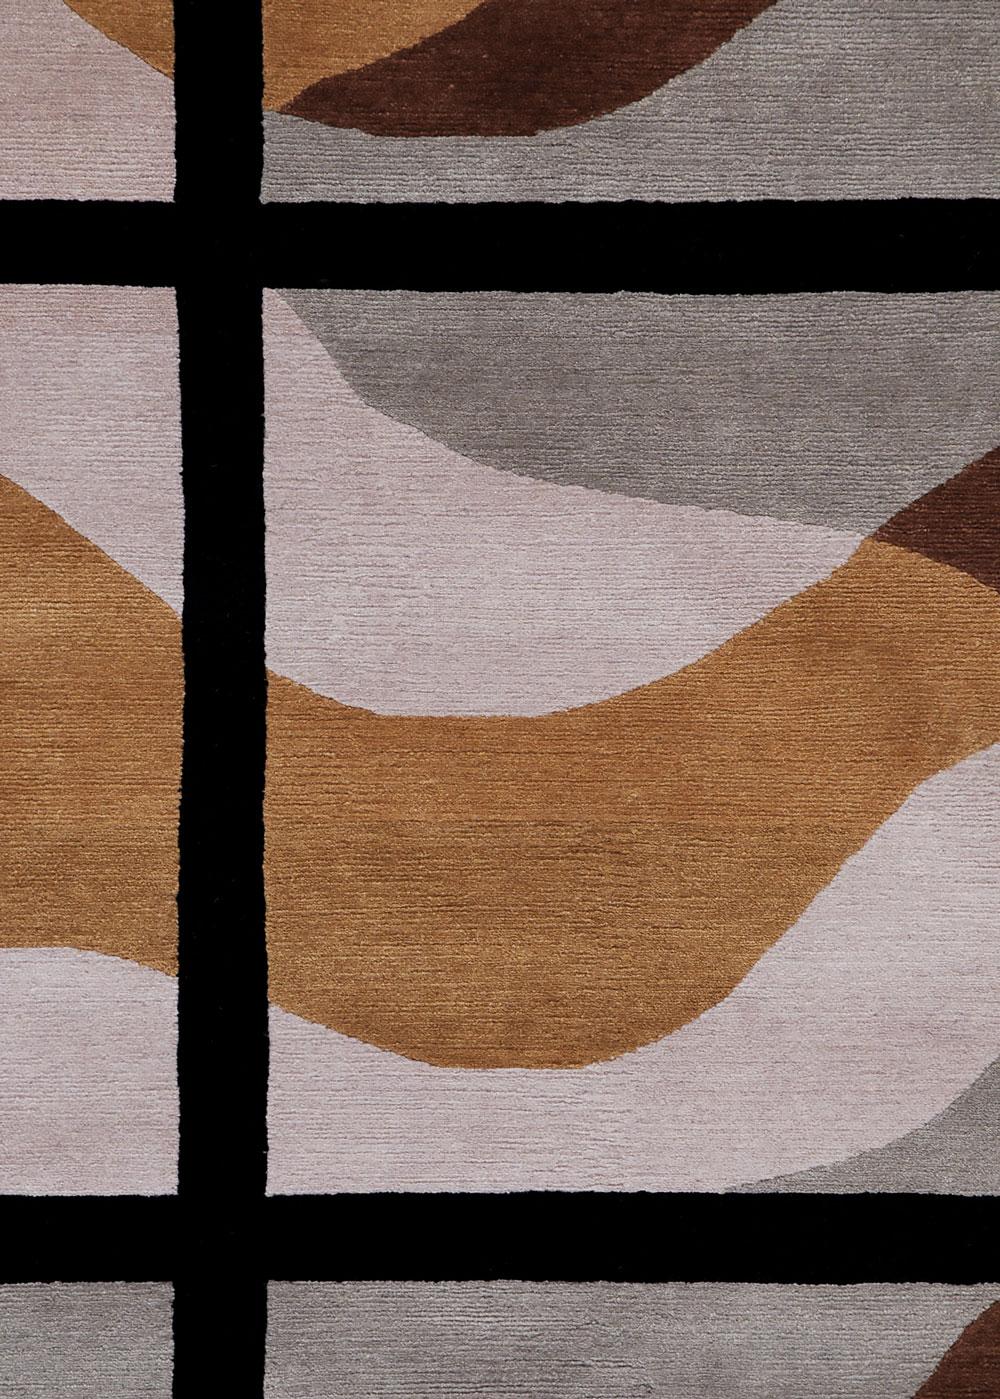 Dune - Alessandro Mendini Modern Design Rug Carpet Wool Cotton Handknotted

'Wild Furs' is a rugs project with a theme: the coat of a wild animal, combined, with references from todays culture and rites. Several designers and artists have been